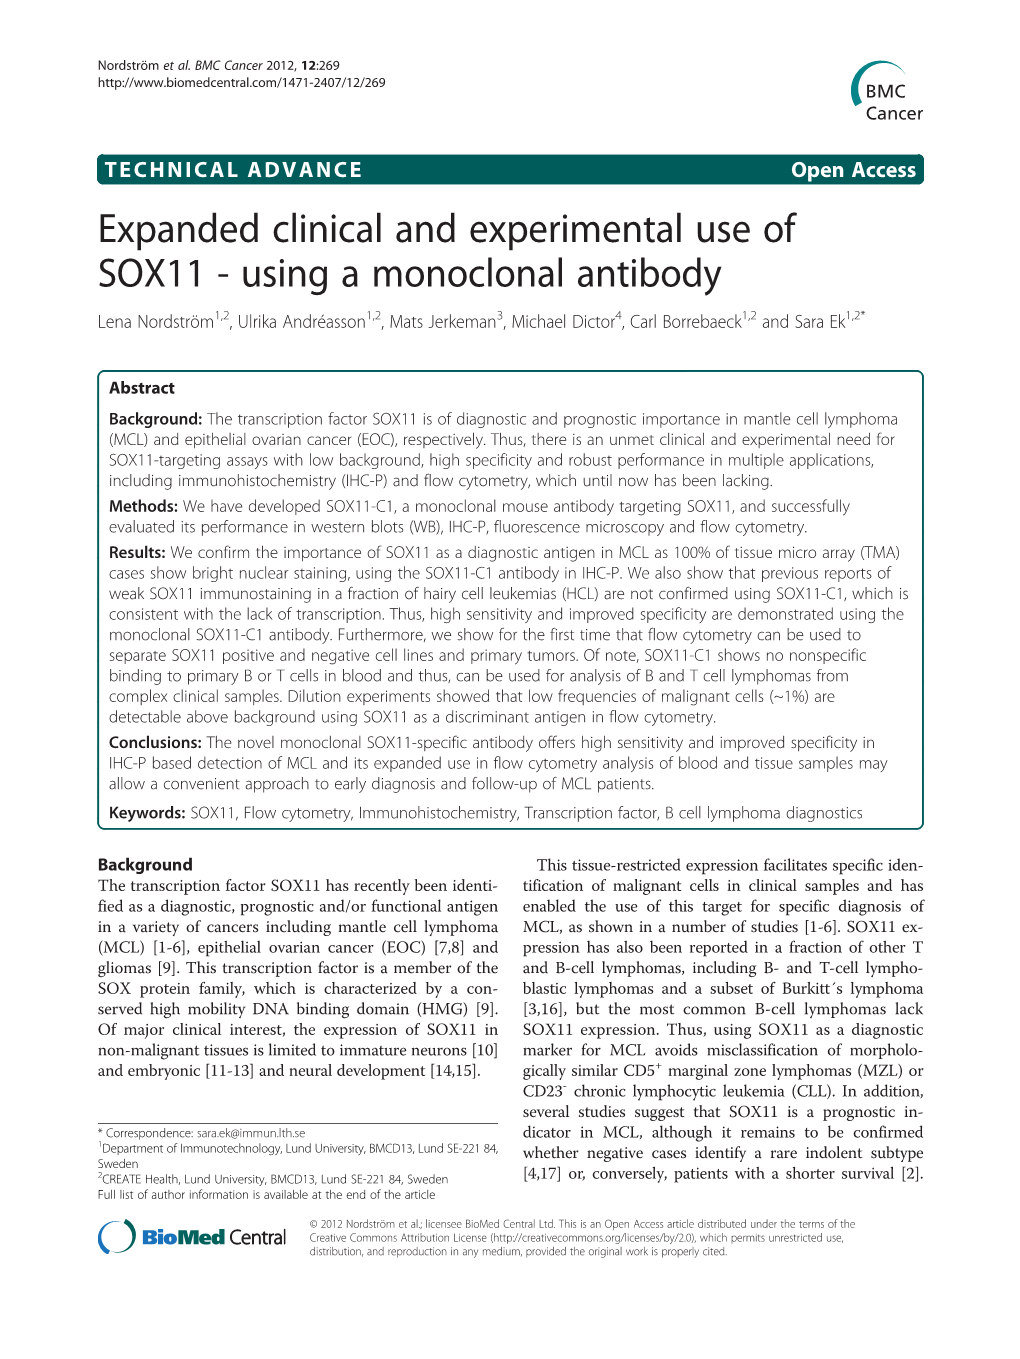 Expanded Clinical and Experimental Use of SOX11